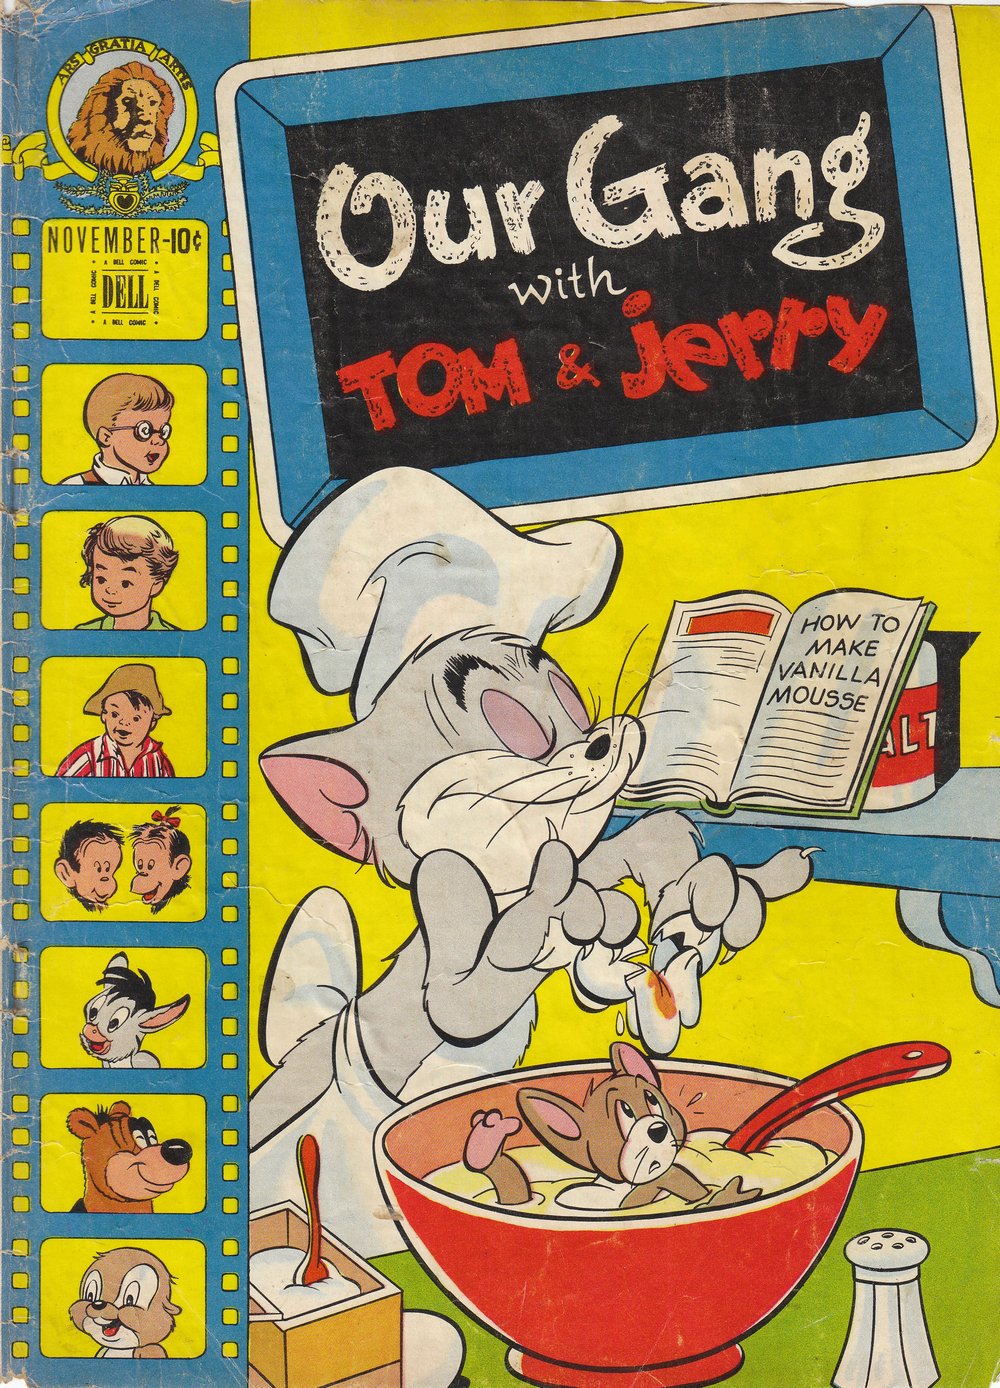 Read online Our Gang with Tom & Jerry comic -  Issue #40 - 1